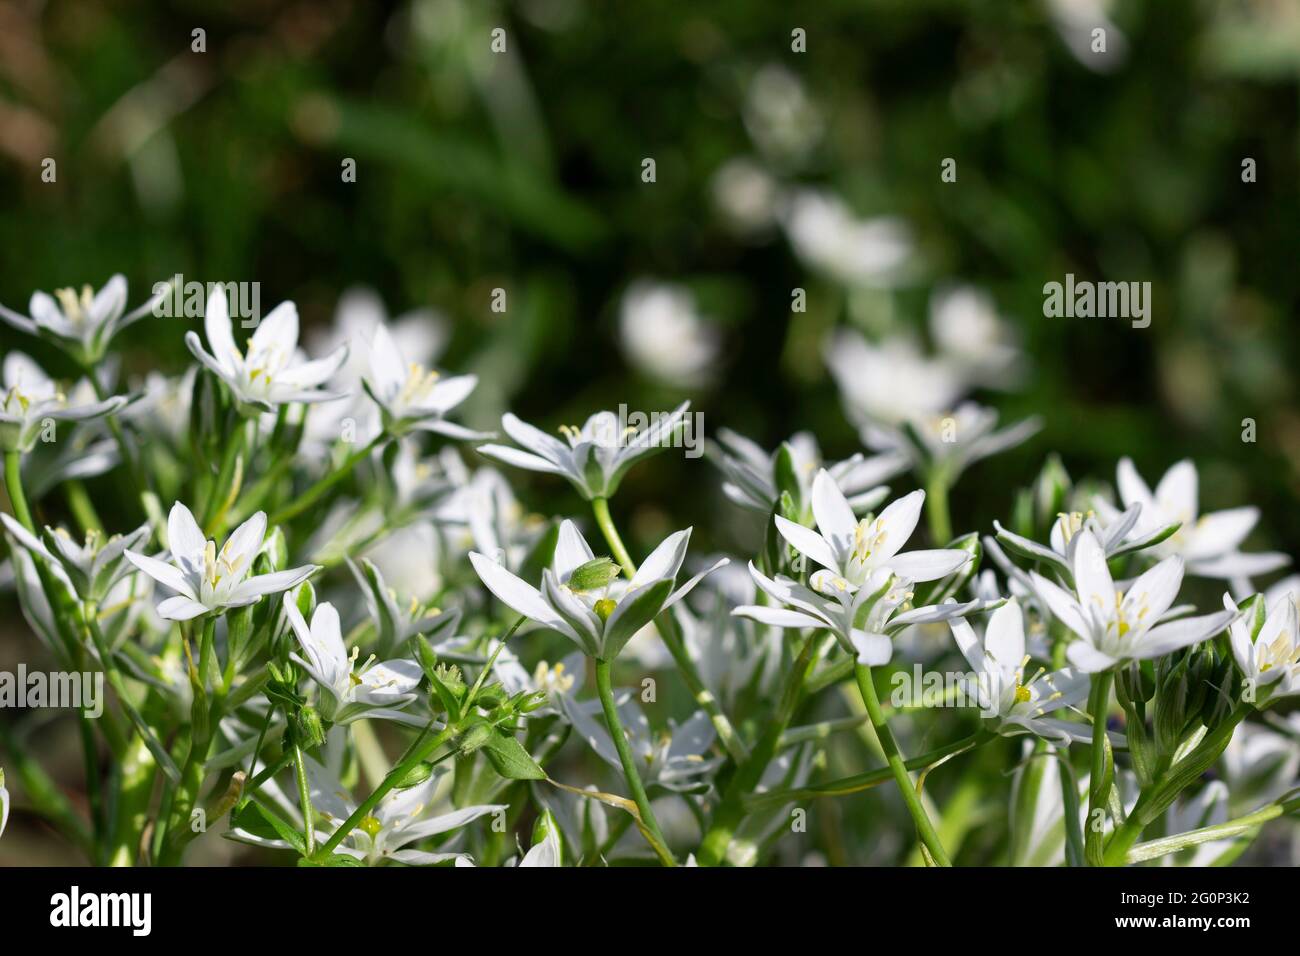 Ornithogalum is a perennial plants, white flowers on a green background. Stock Photo